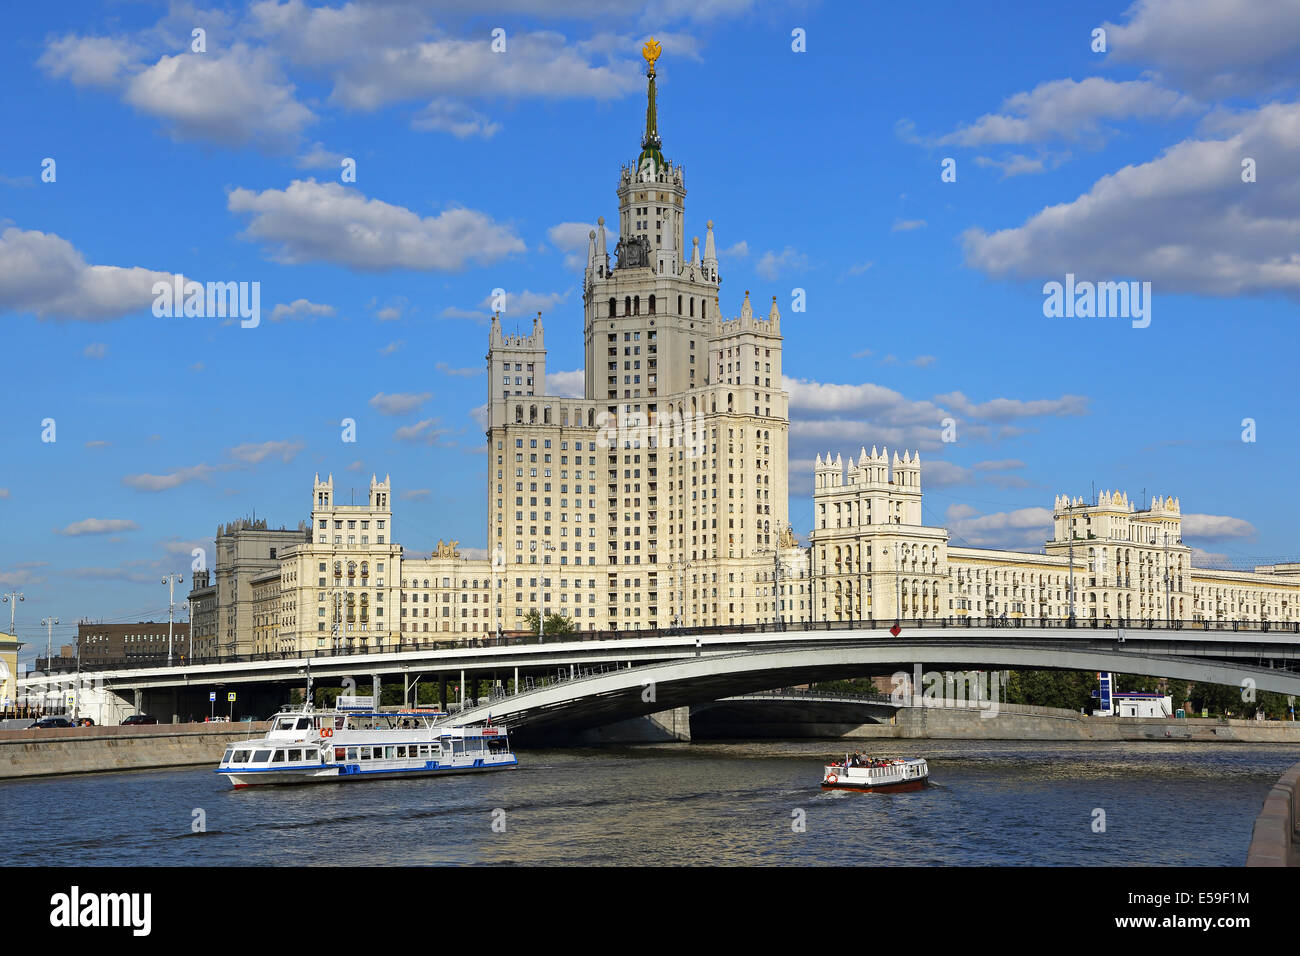 High-rise building on Kotelnicheskaya embankment in Moscow, Russia. Stock Photo